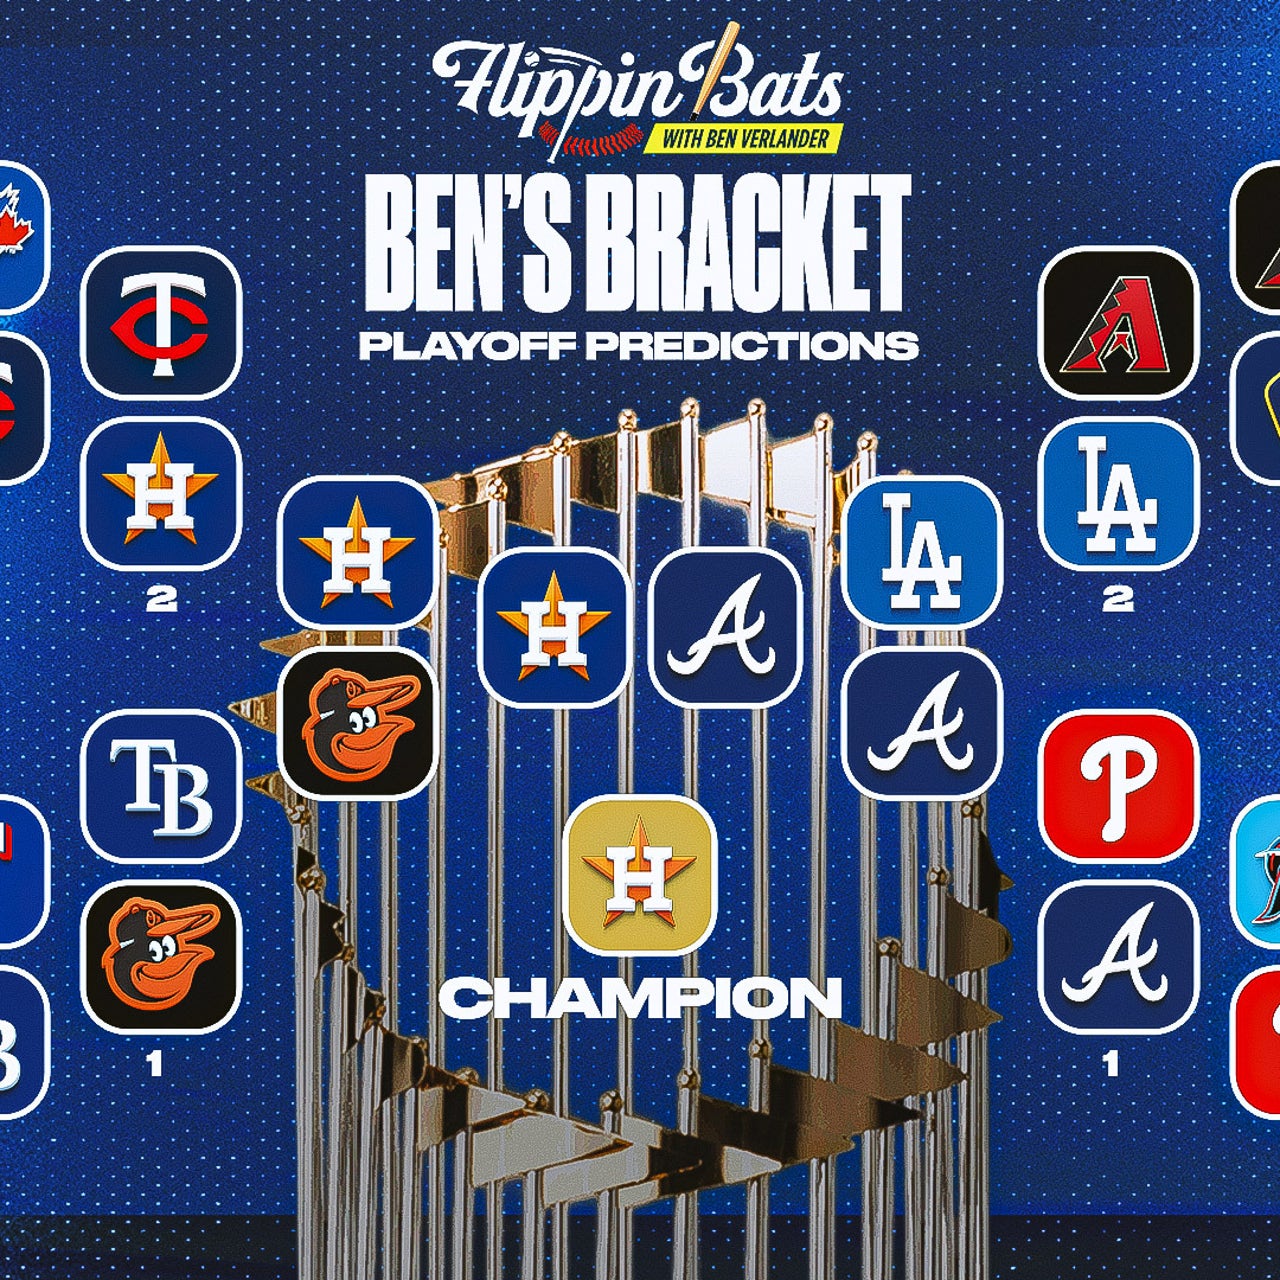 MLB News: The 2021 MLB playoffs: The bracket, the schedule and how